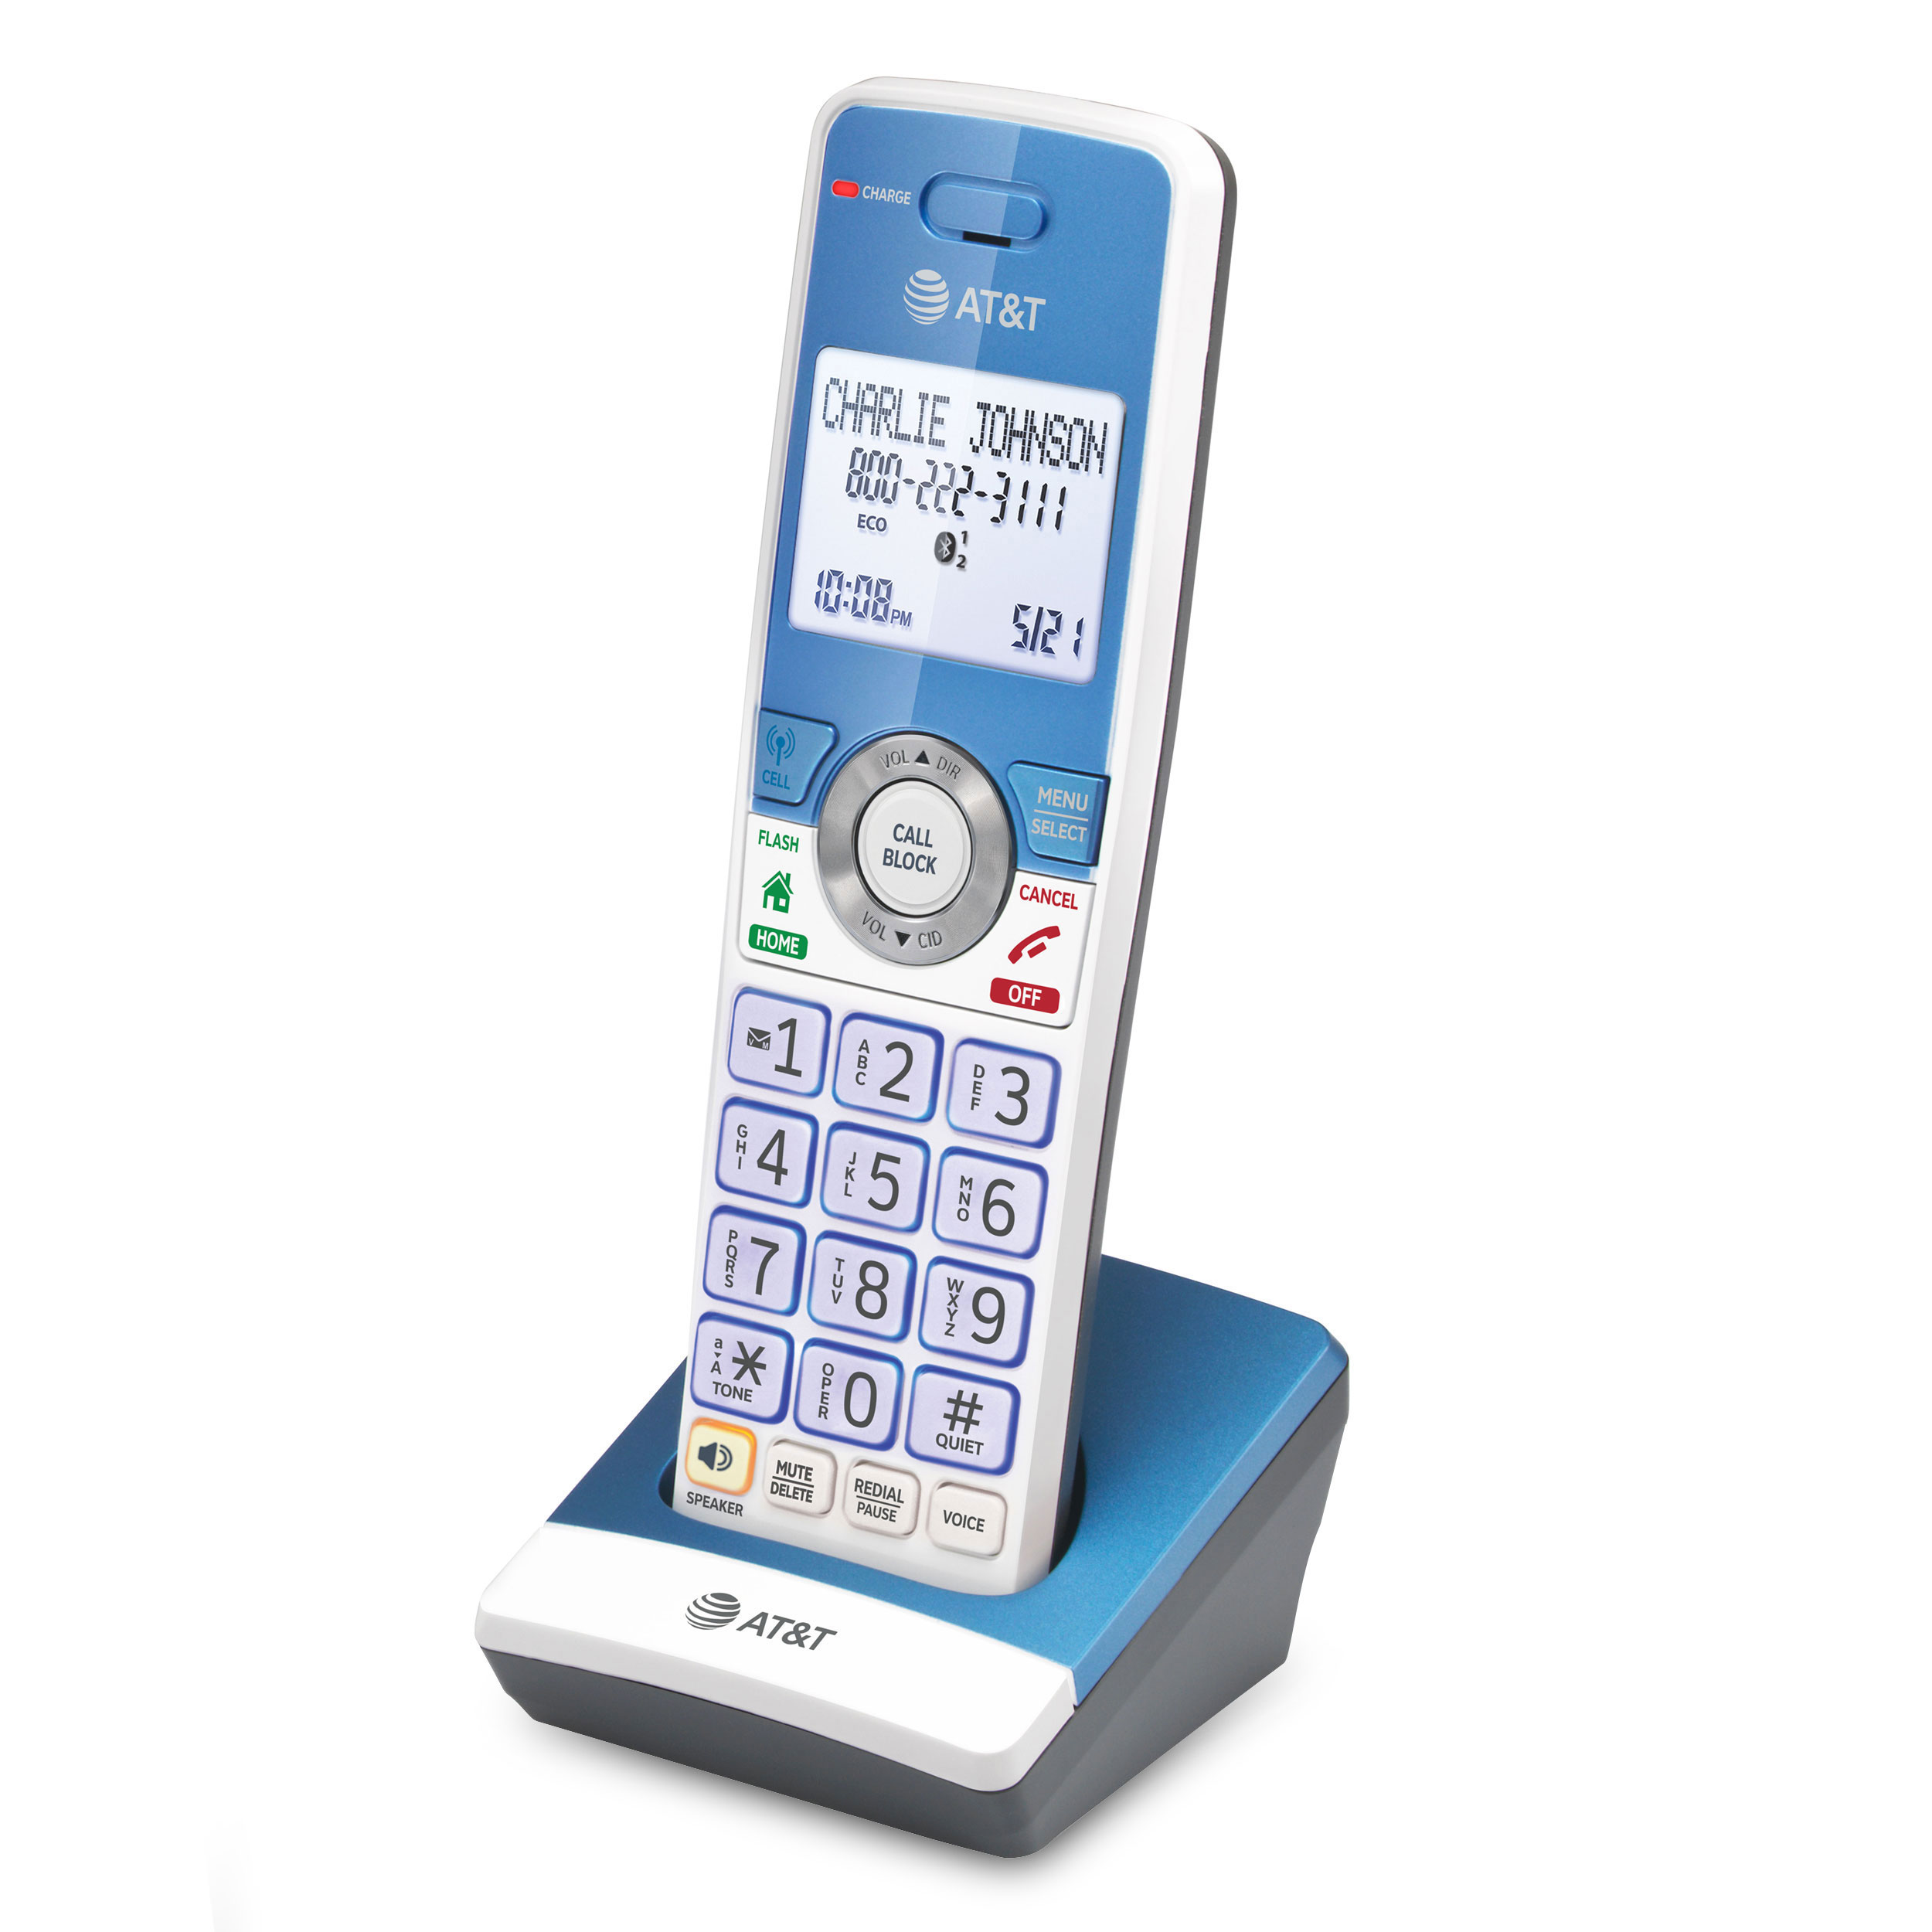 3-Handset Expandable Cordless Phone with Unsurpassed Range, Bluetooth Connect to Cell™, Smart Call Blocker and Answering System - view 7